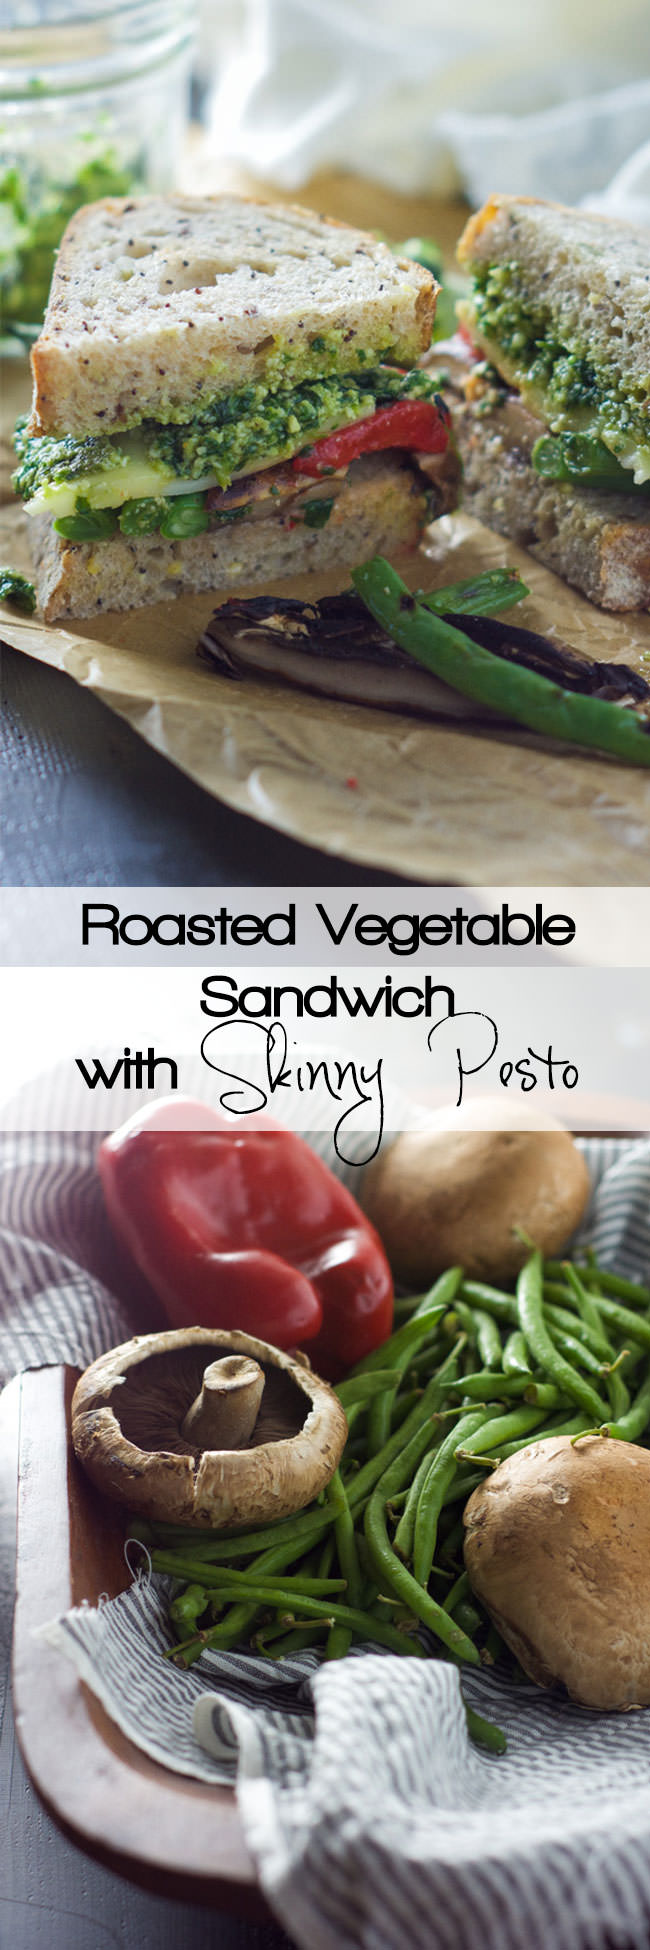 A sandwich that is full of flavor! Farmers Market Roasted Vegetable Sandwich with Skinny Pesto is loaded with fresh vegetables creamy provolone and layered with a healthy pesto sauce!